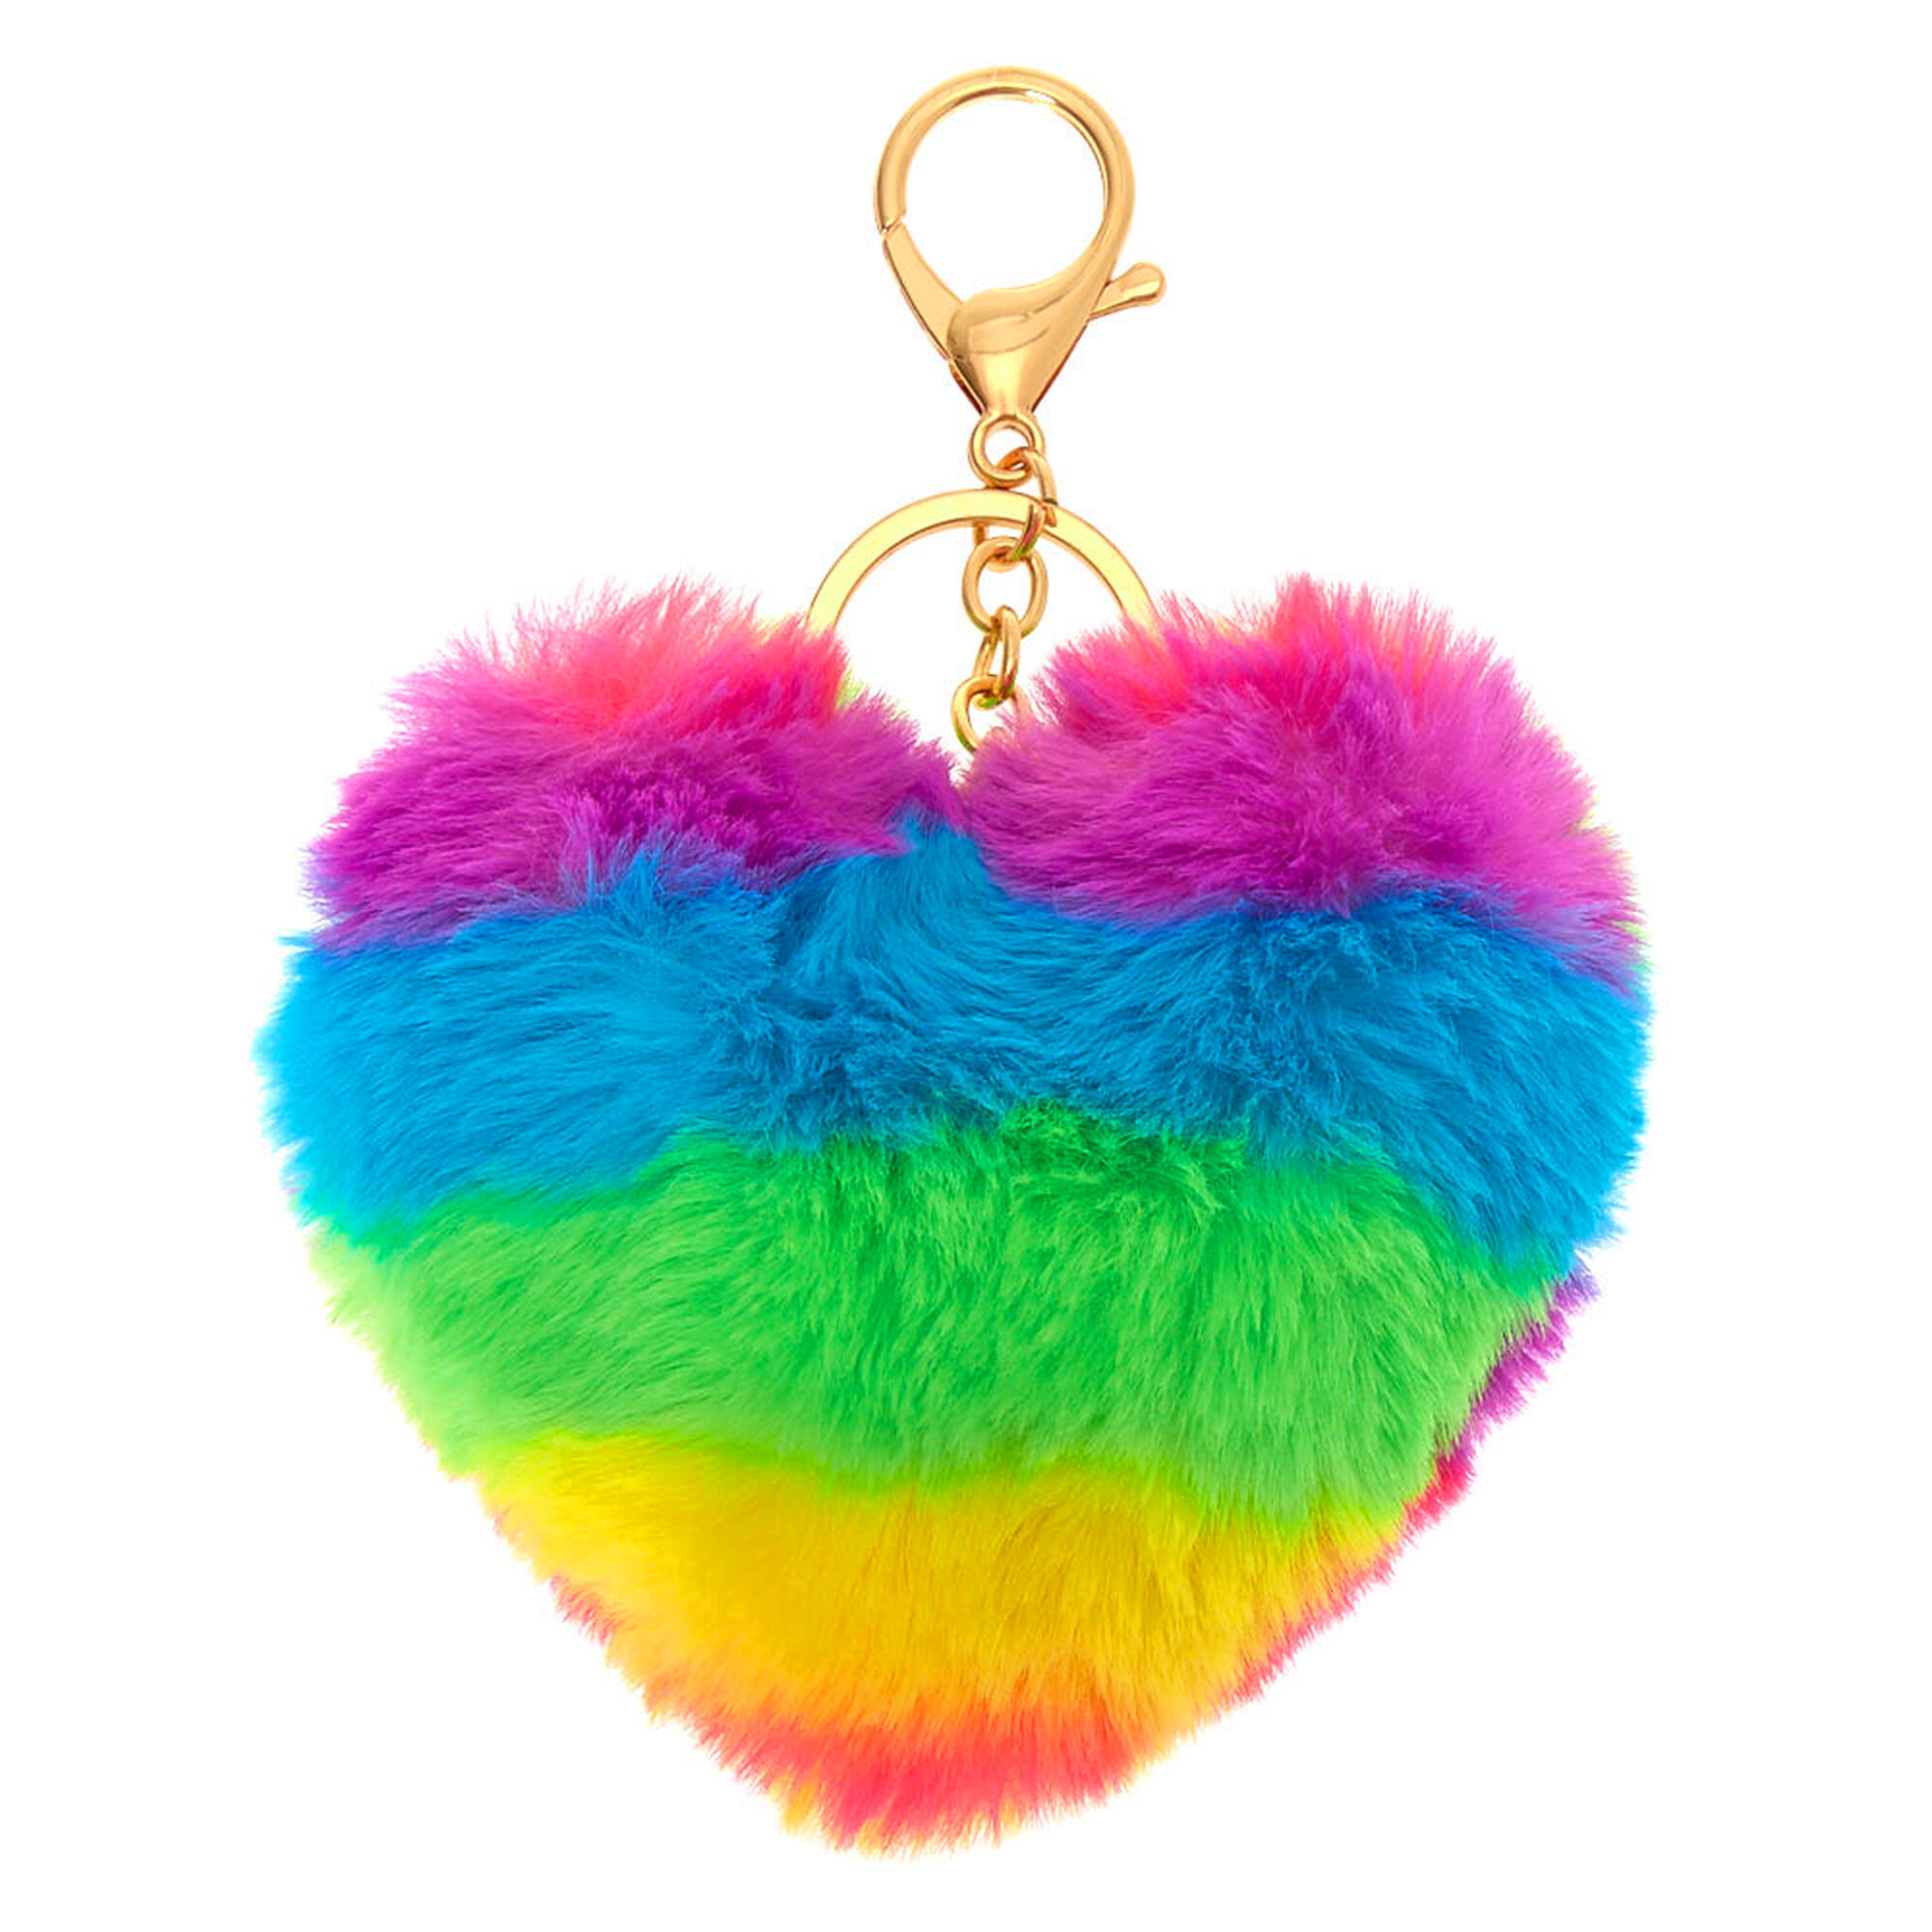 View Claires Rainbow Heart Pom Keychain Gold information